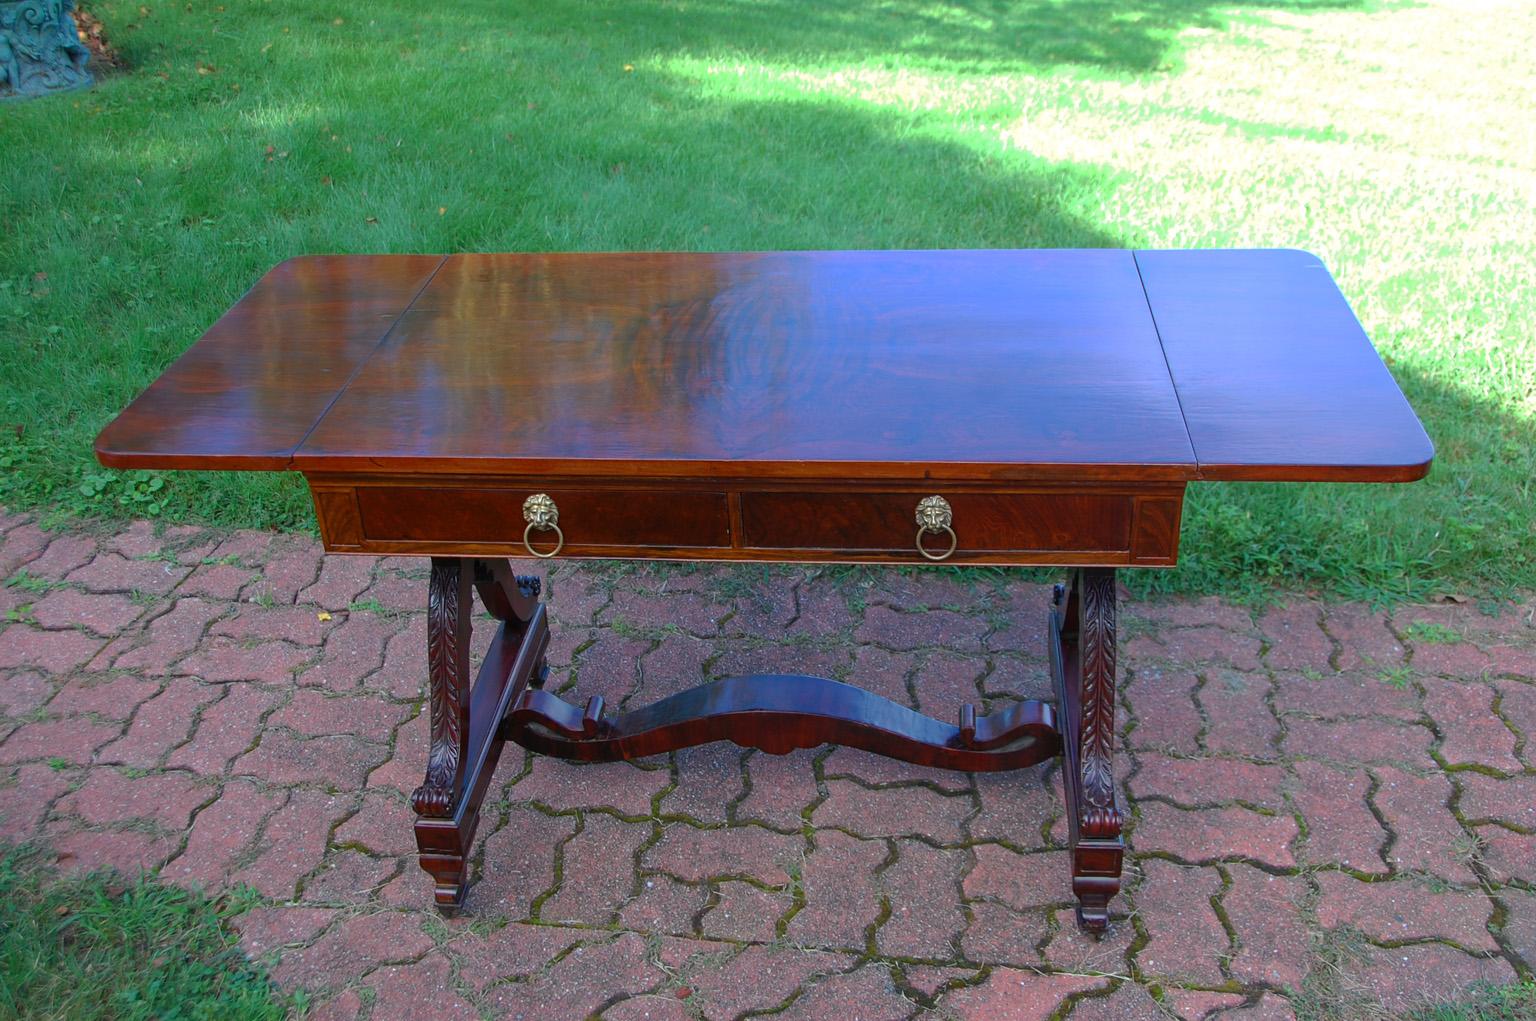 19th Century American Federal Period Rosewood Sofa Table with Acanthus Leaf Carving